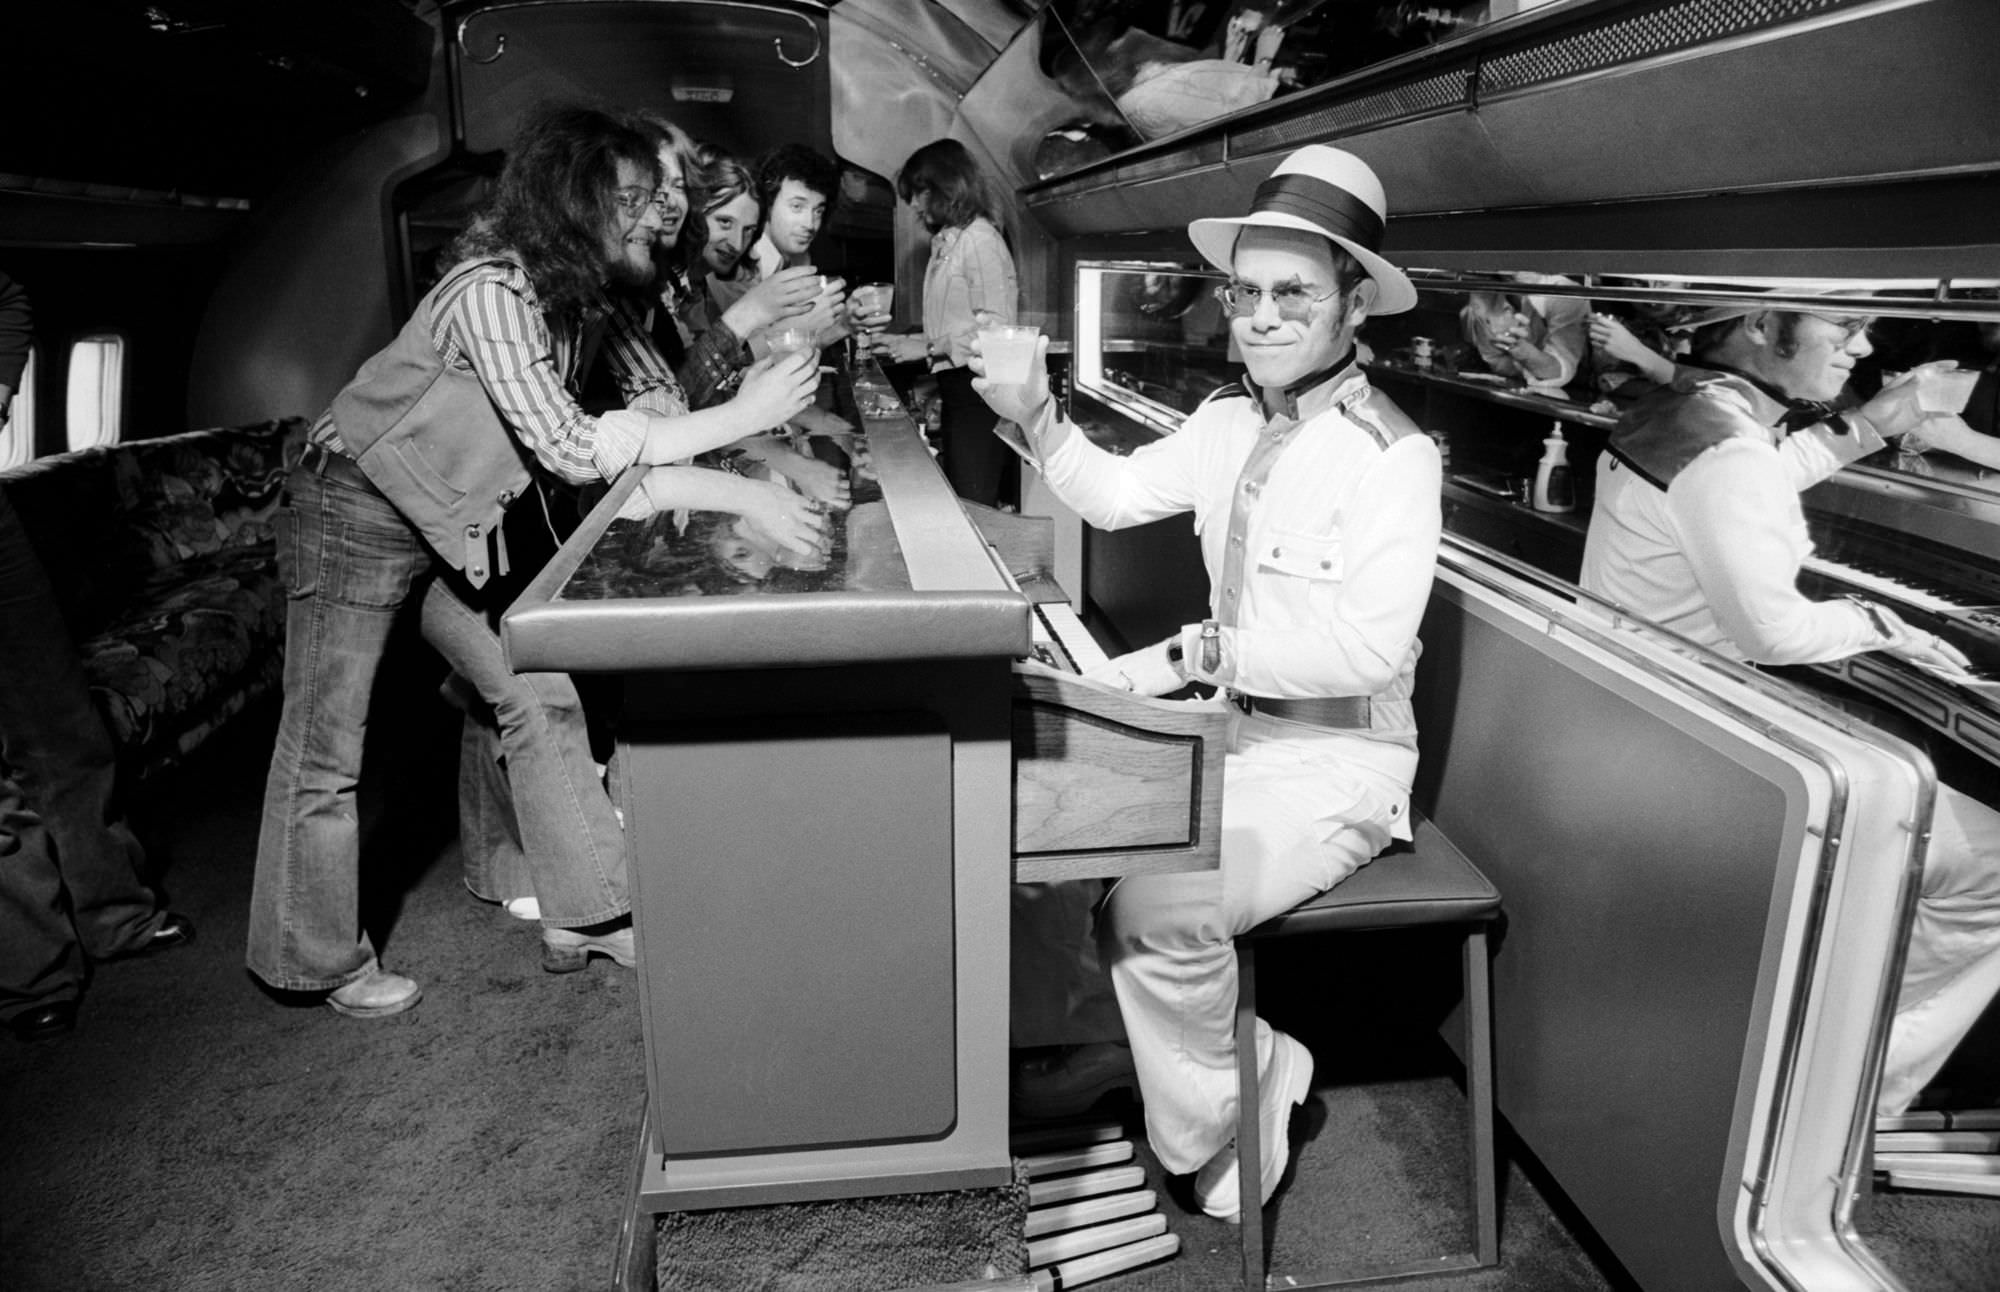 Elton John travelling on his a private jet, complete with a piano bar, 1974